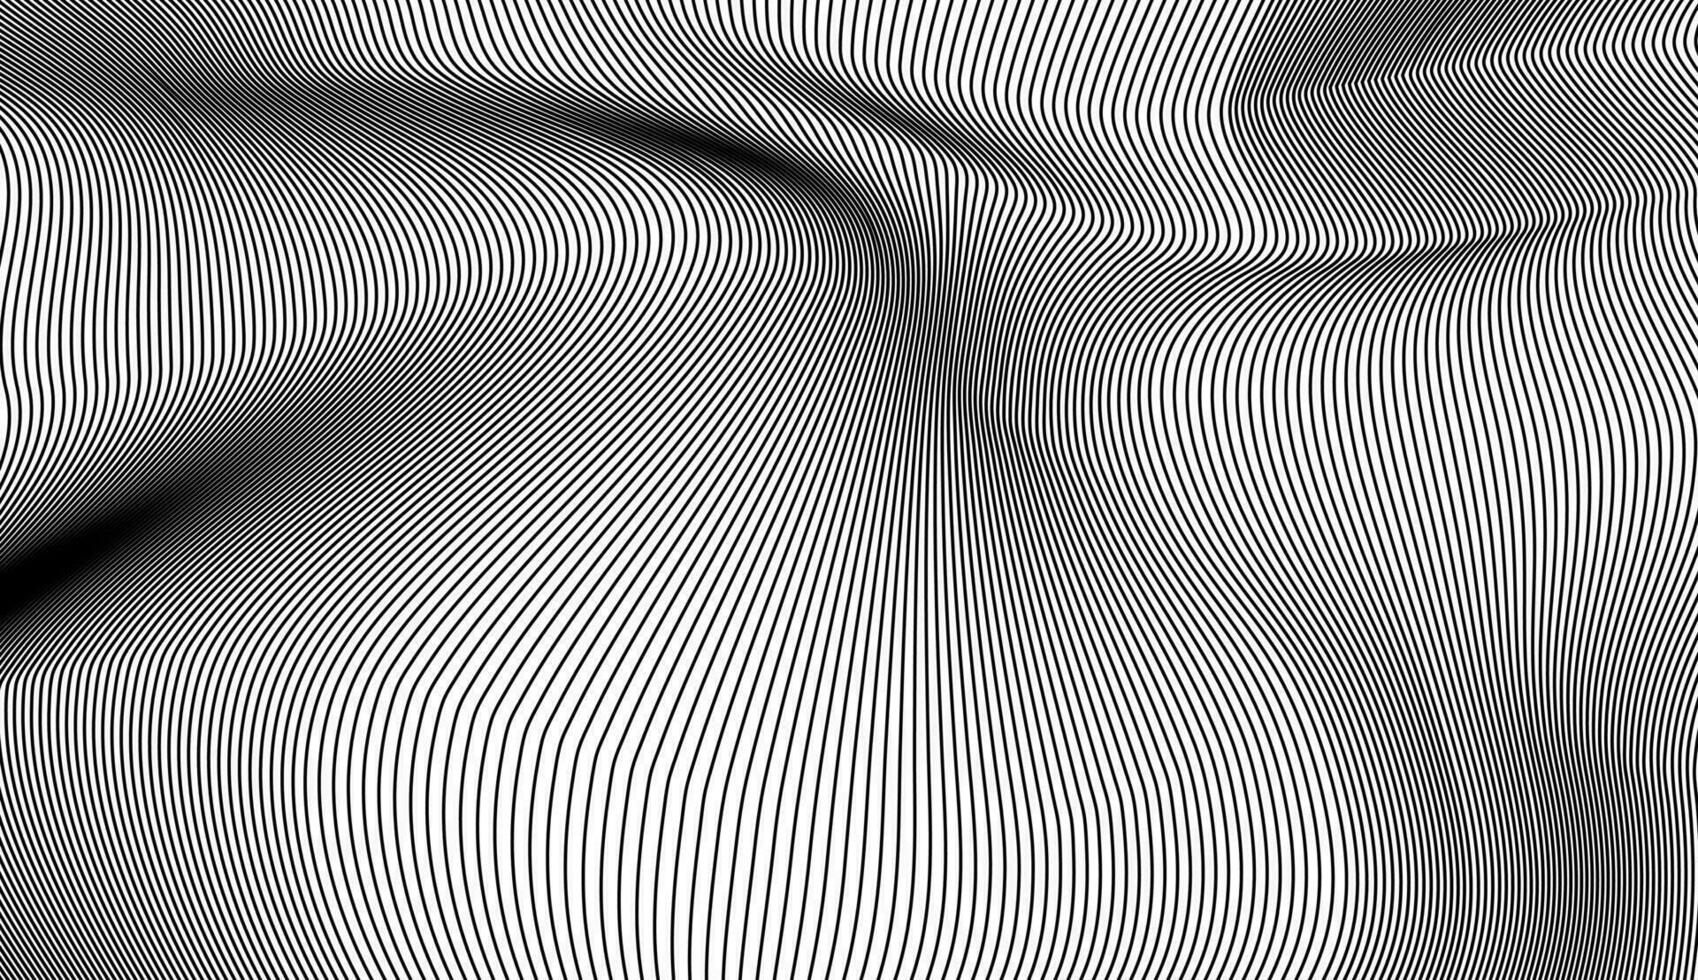 Abstract background image, black lines, abstract wavy lines ,vector illustration. vector